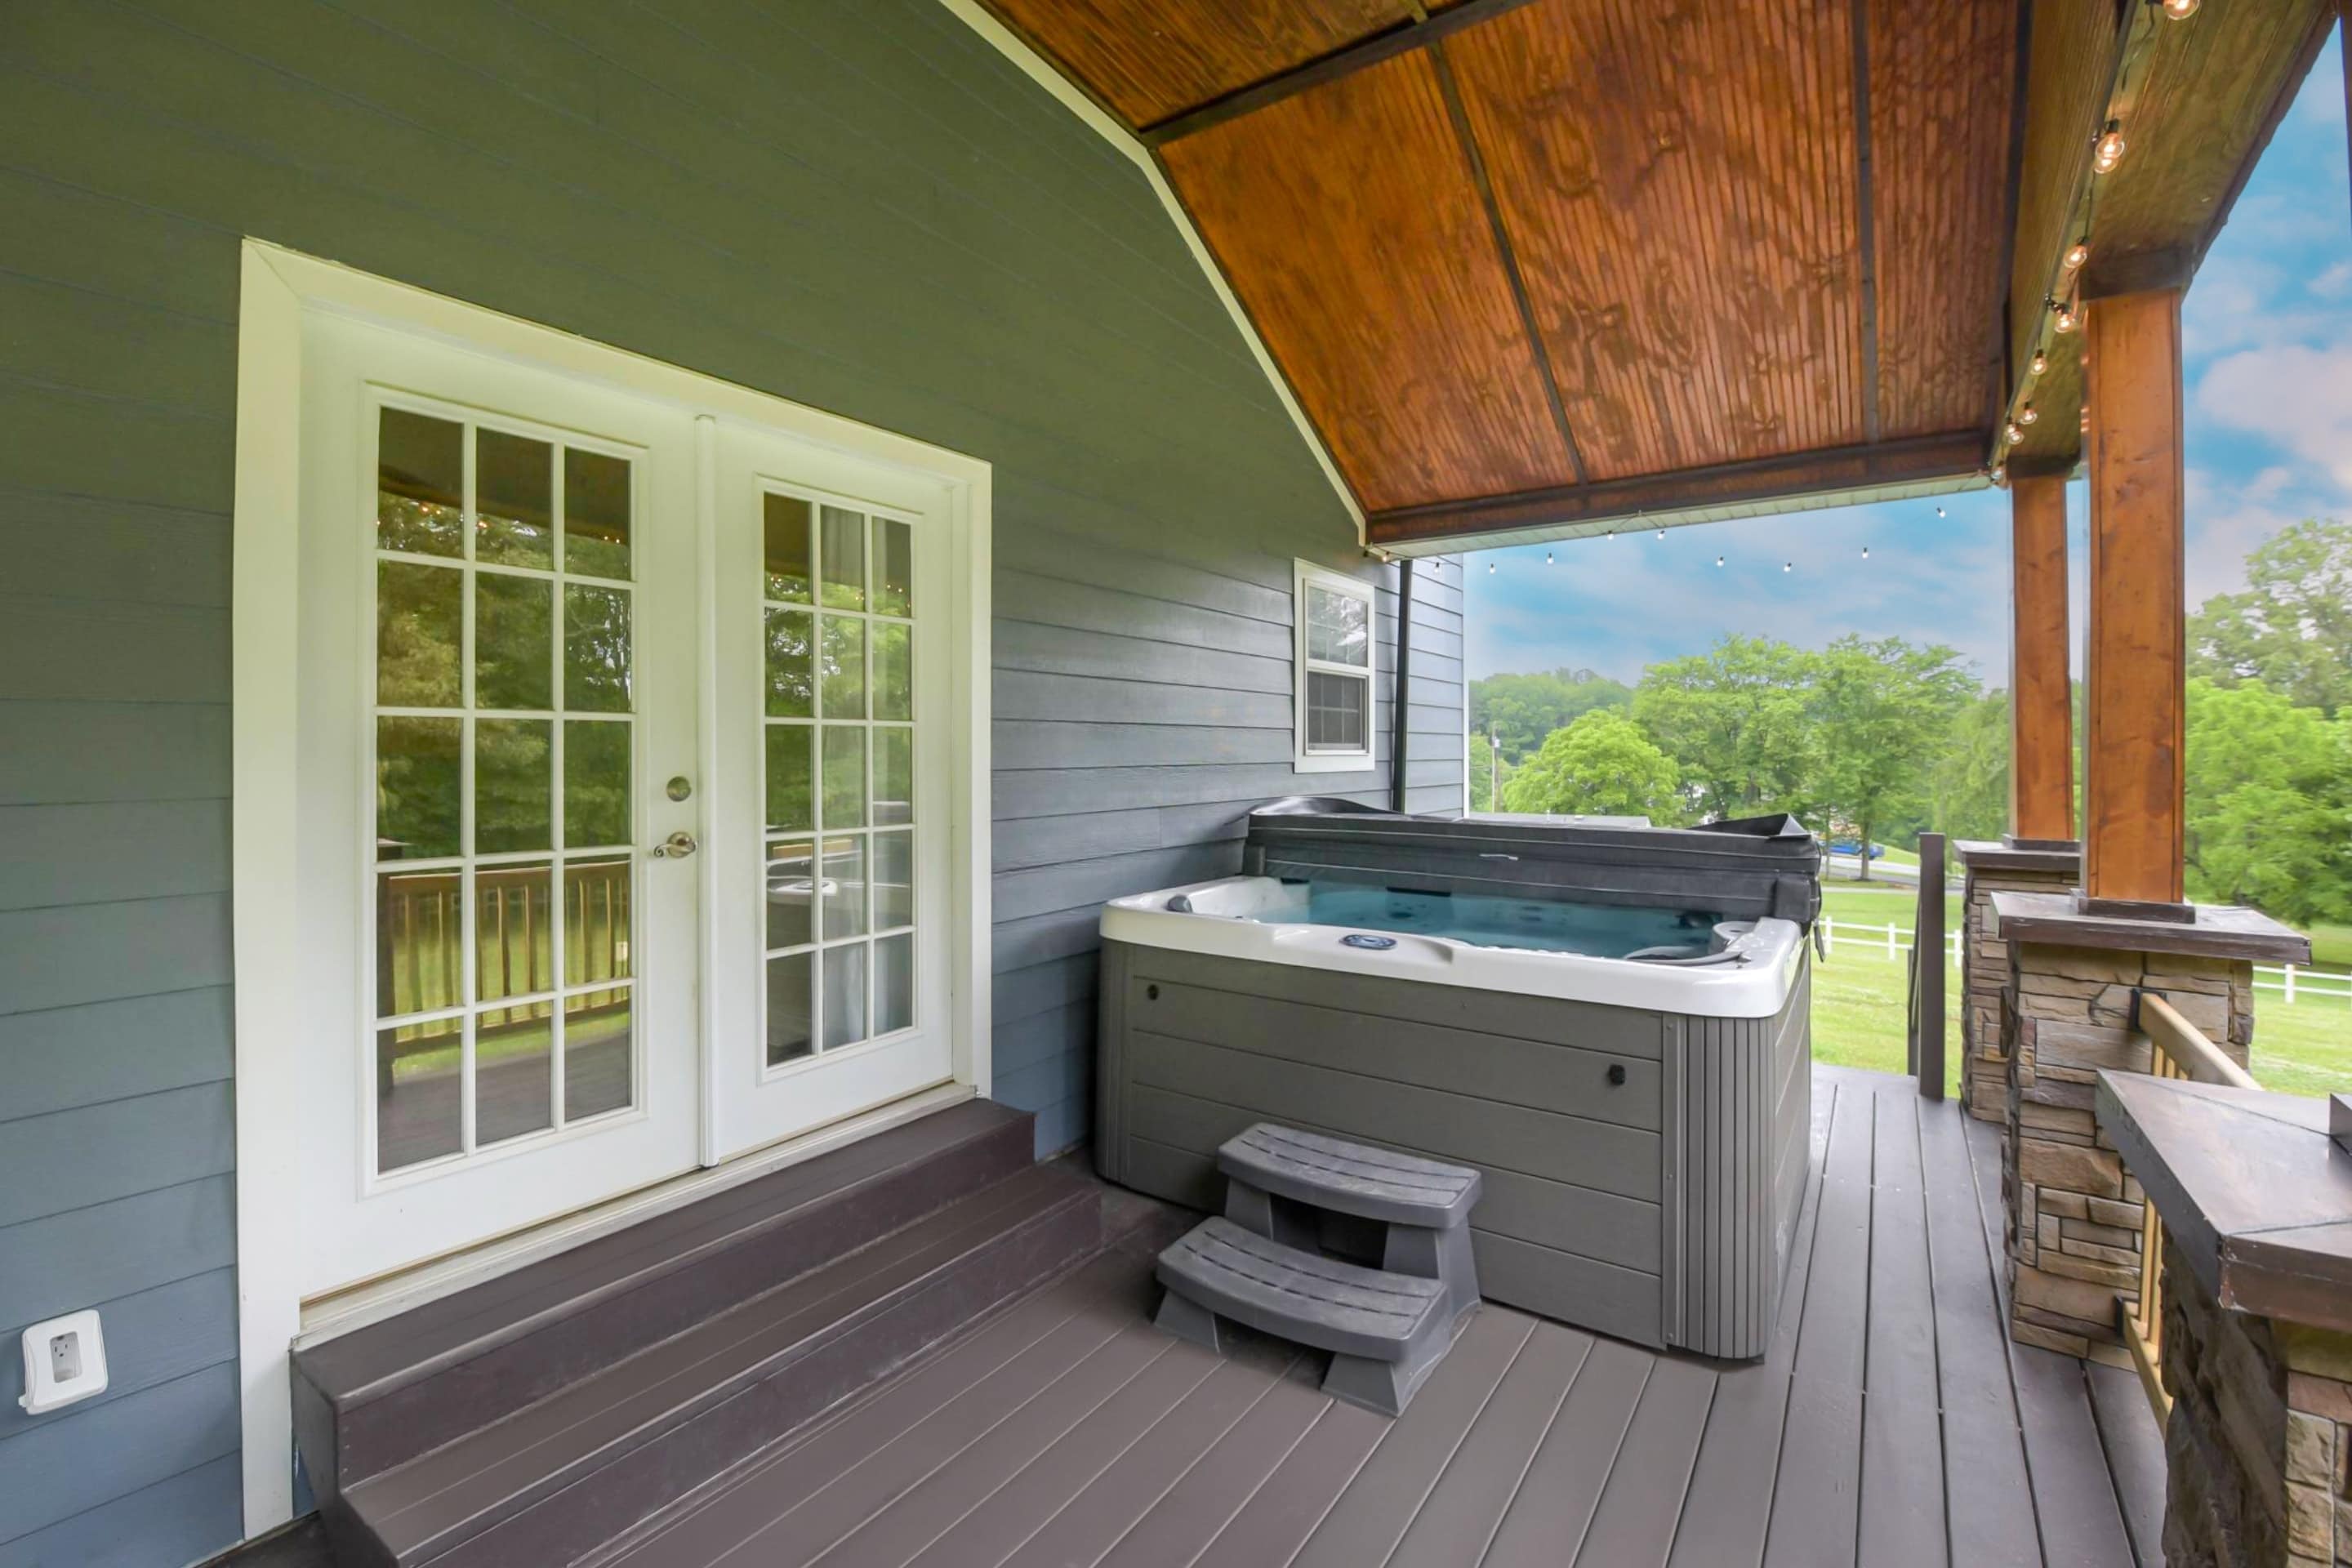 Soak away your worries in our hot tub.